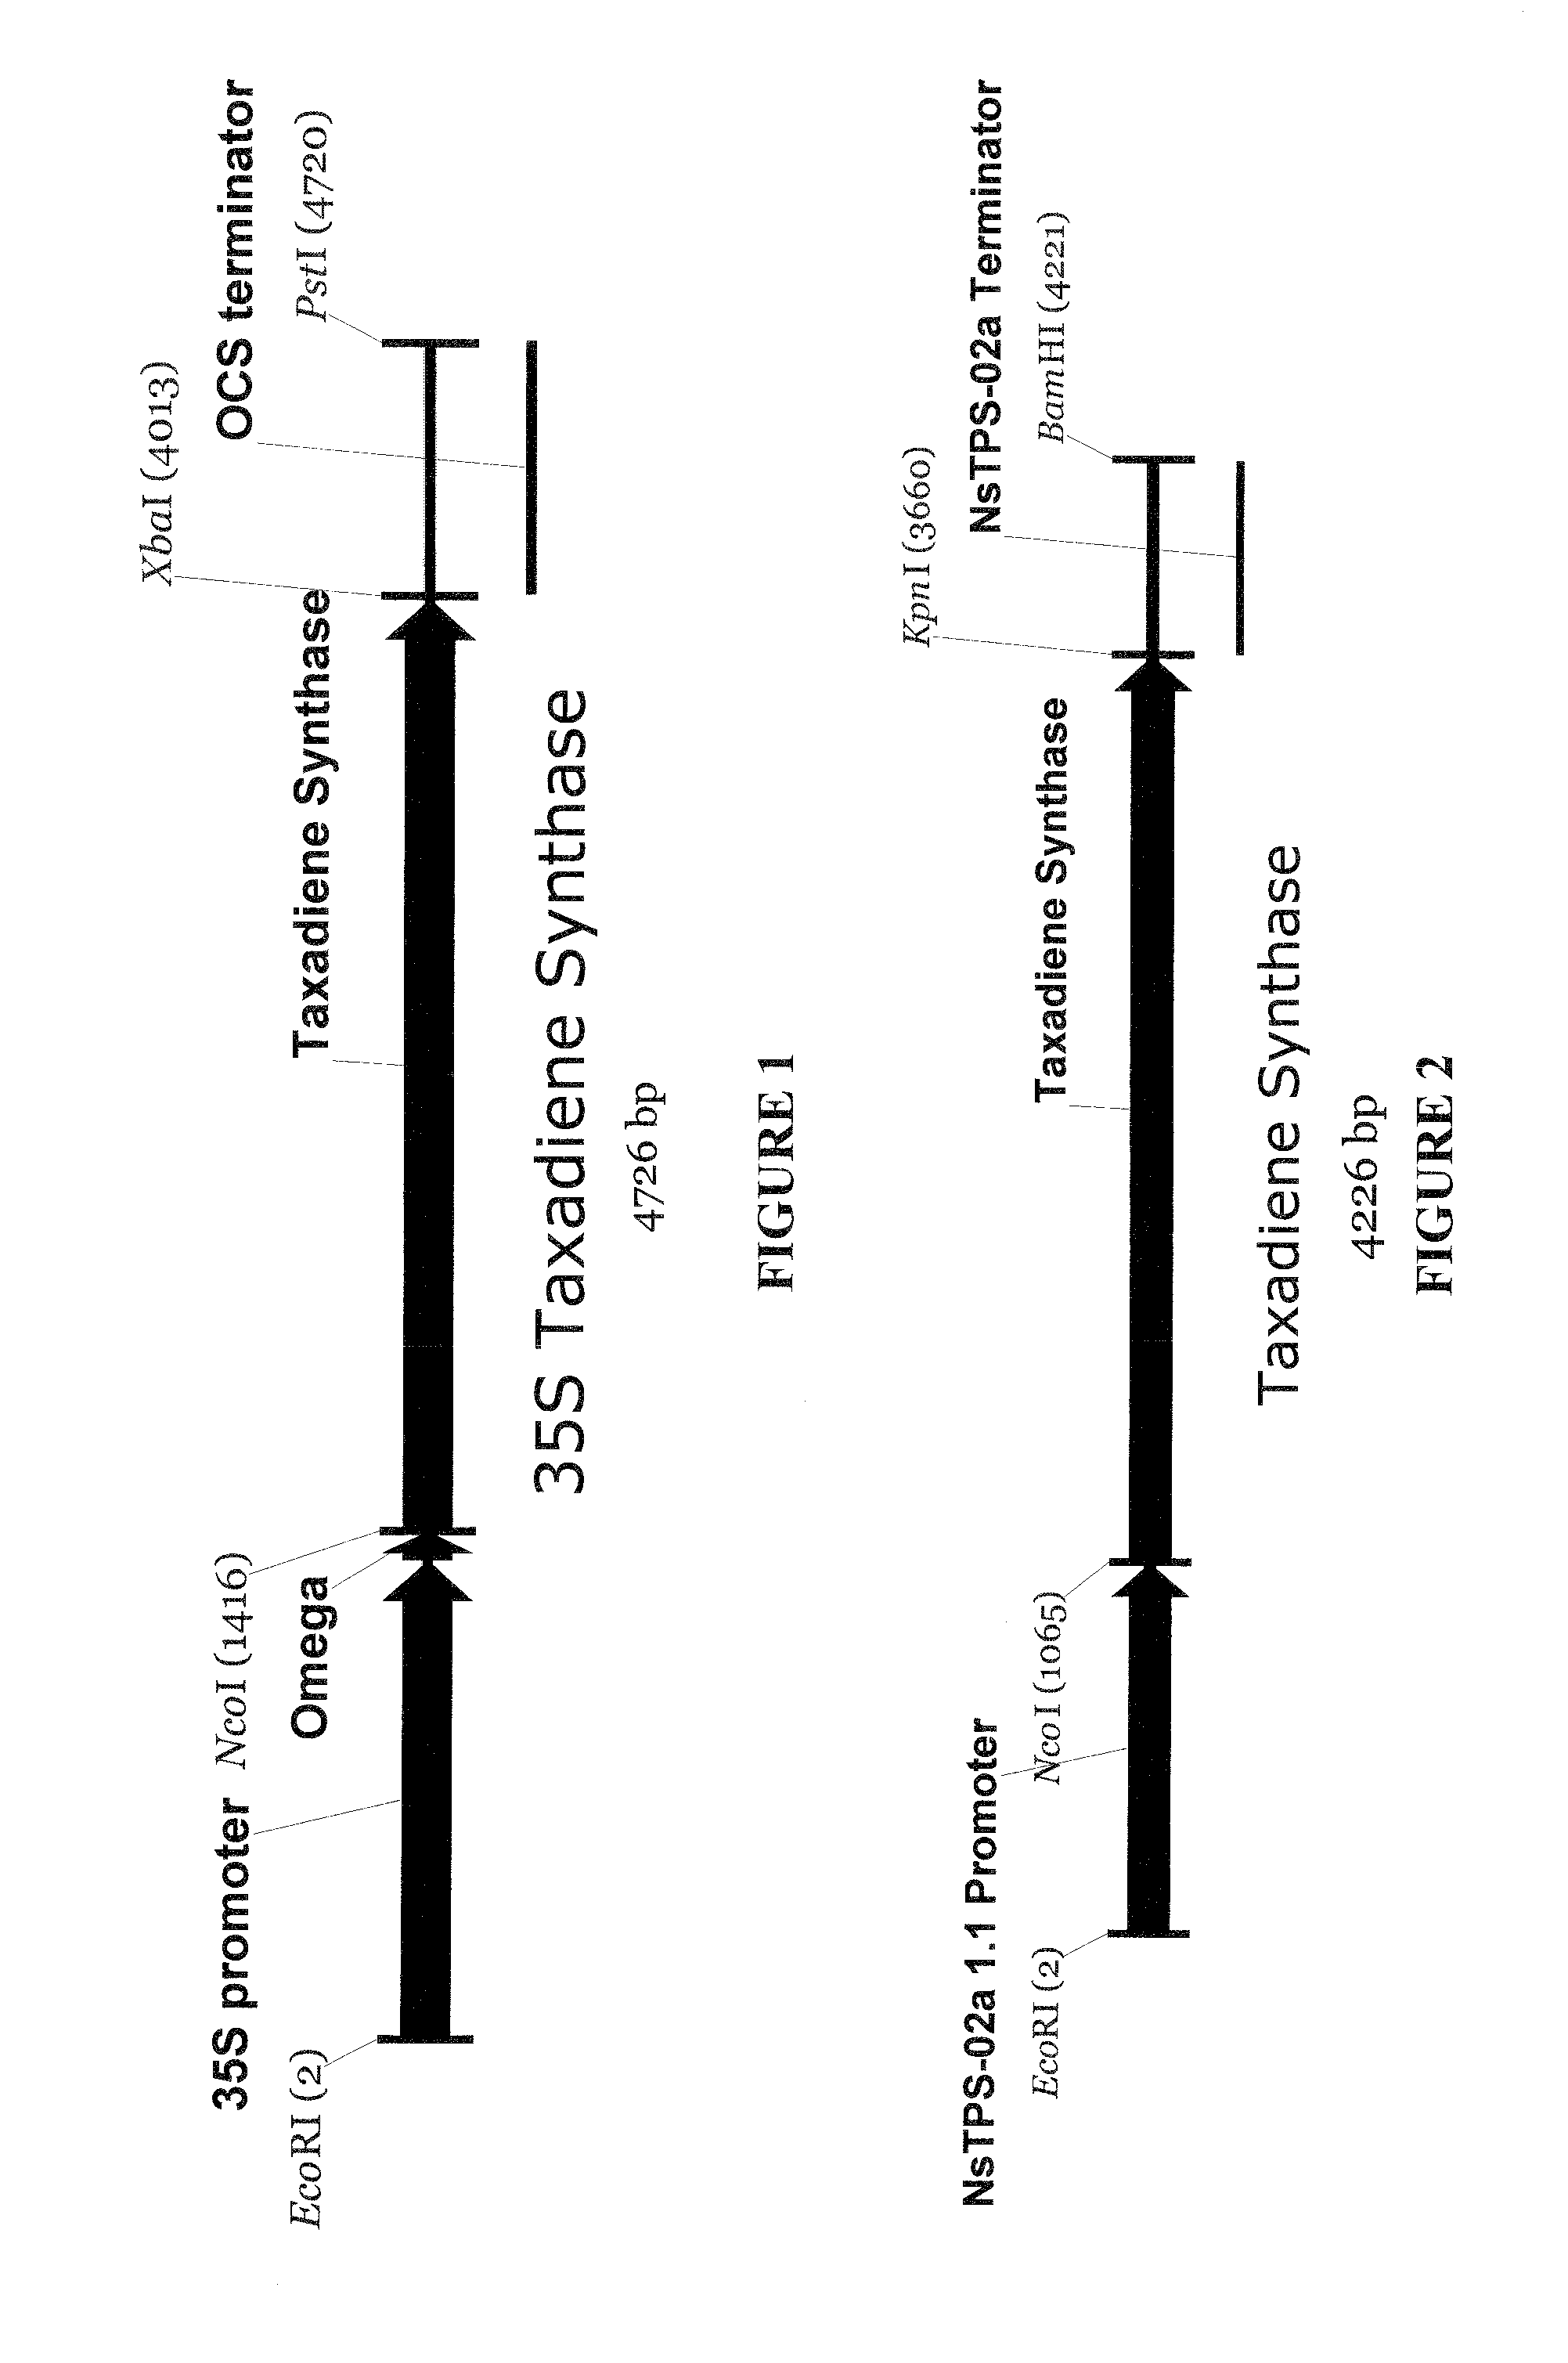 System for producing terpenoids in plants